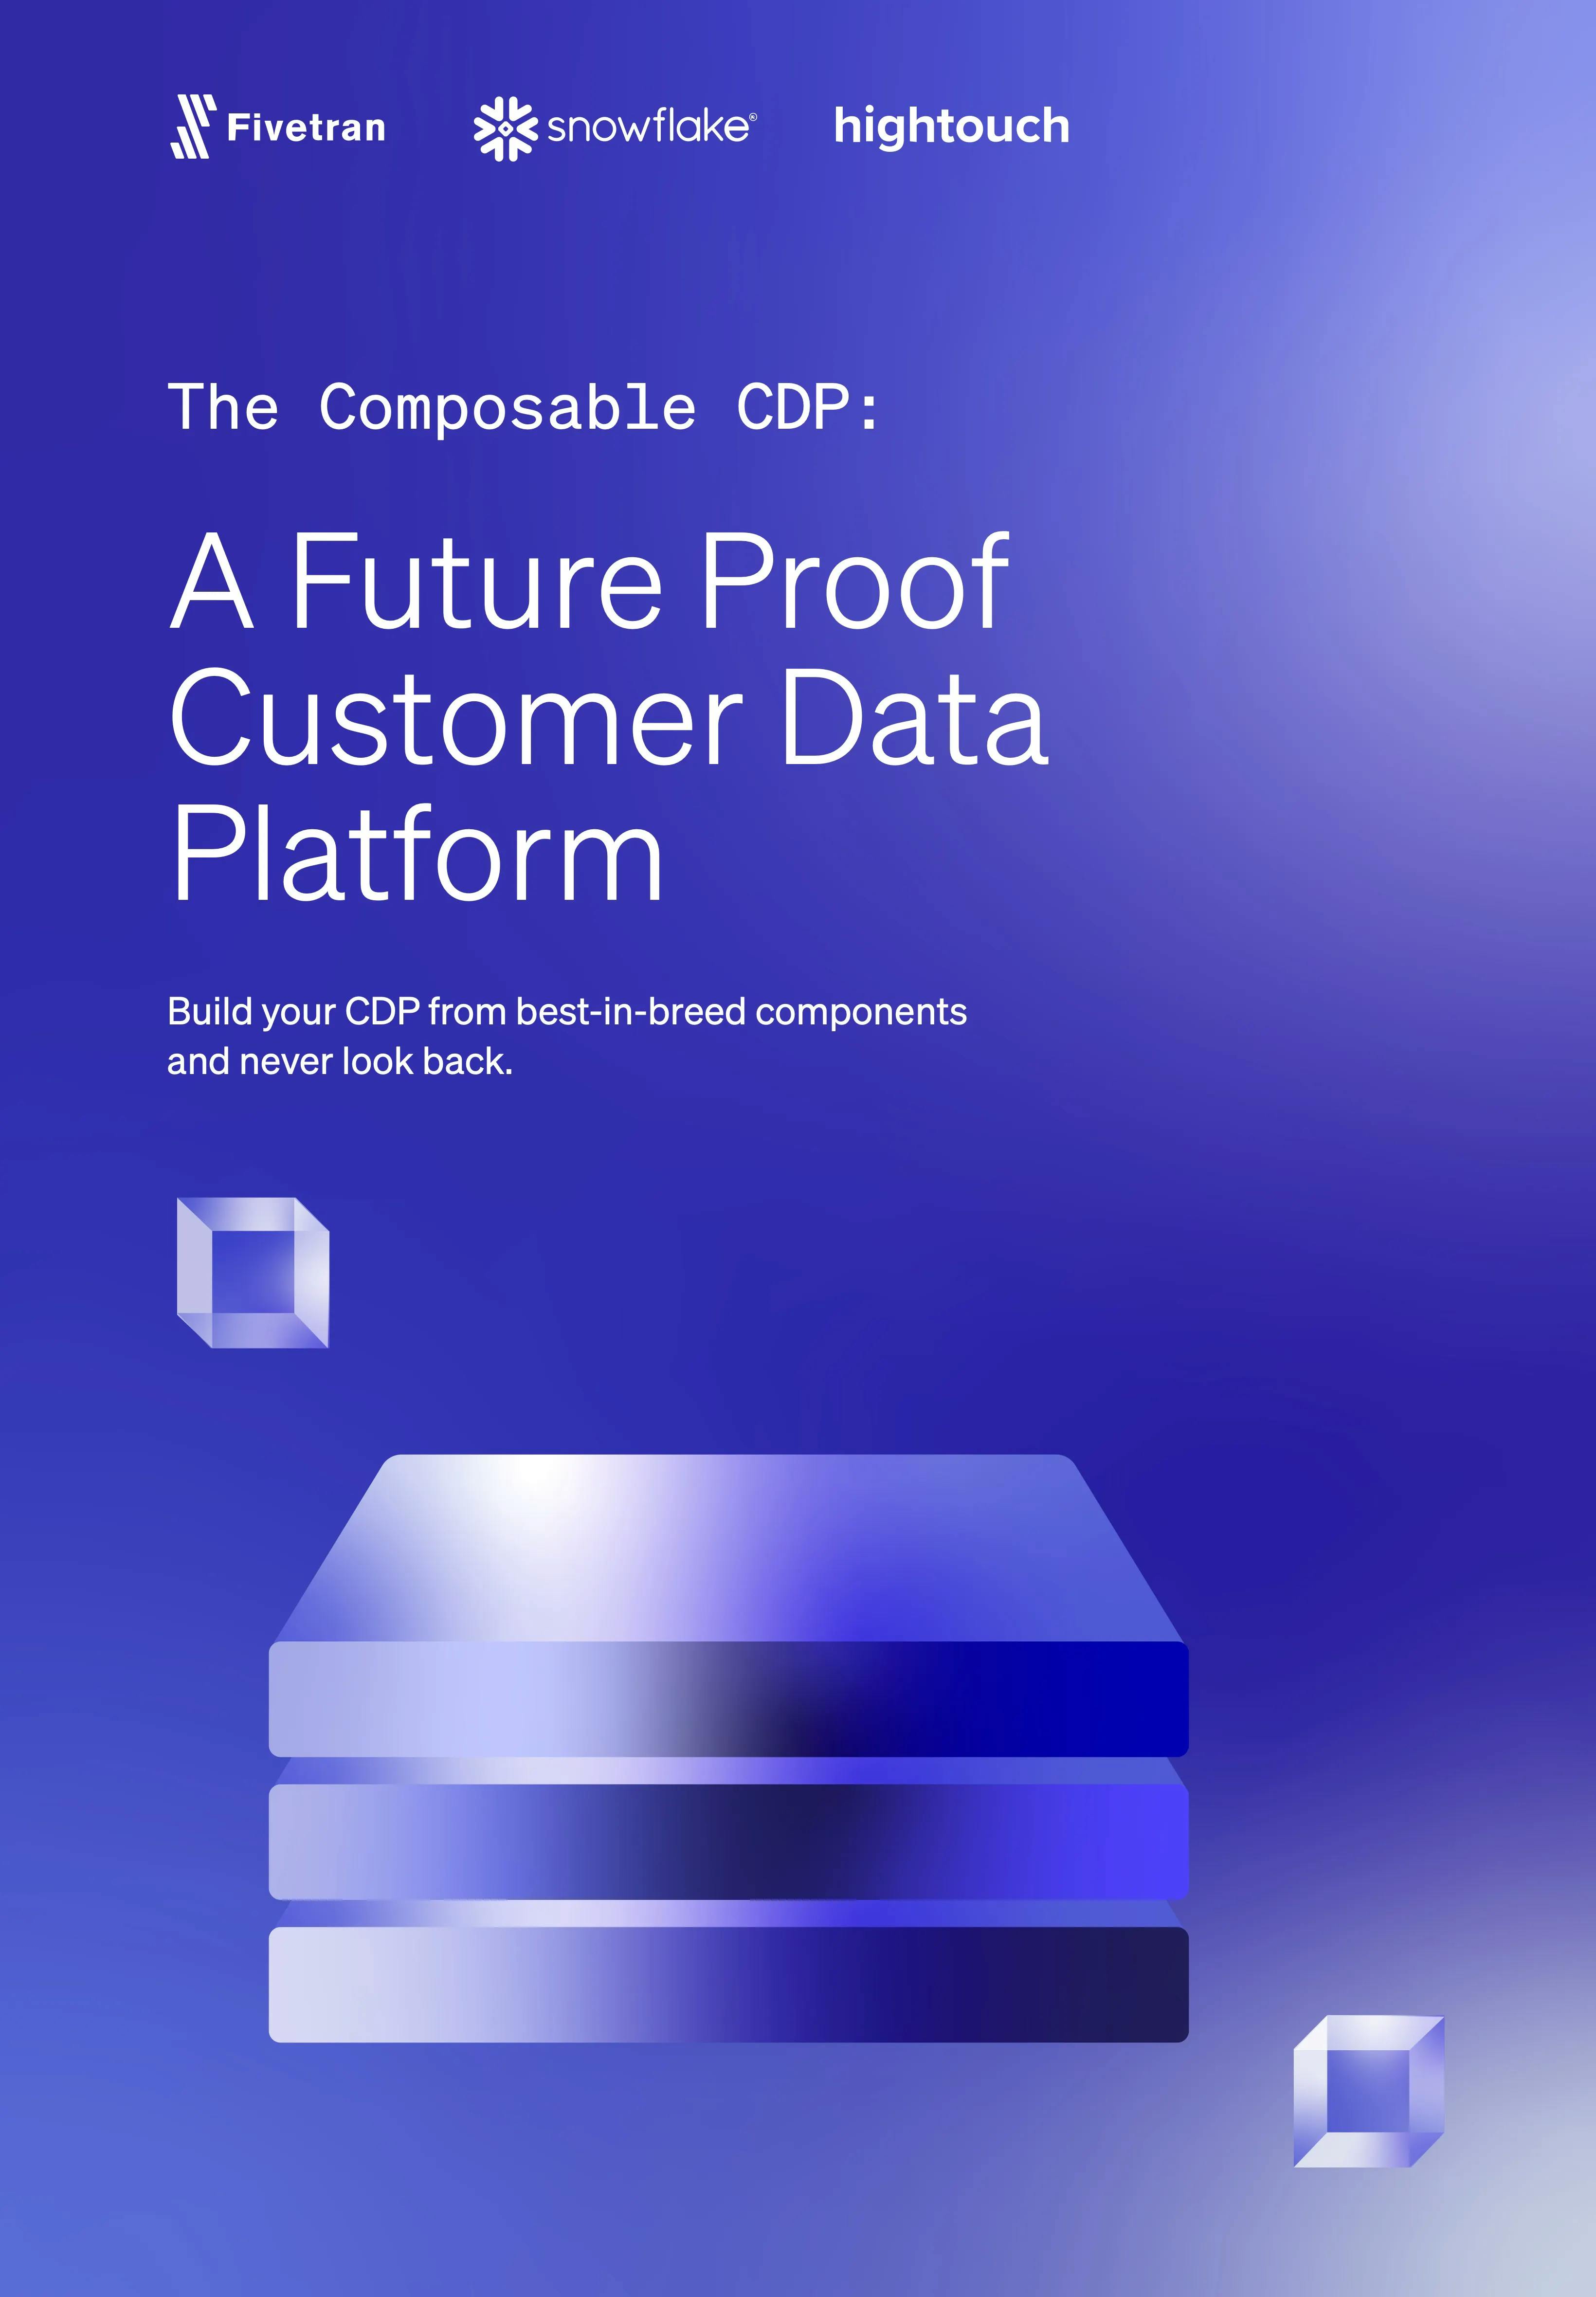 The Composable CDP - A Future Proof Customer Data Platform.